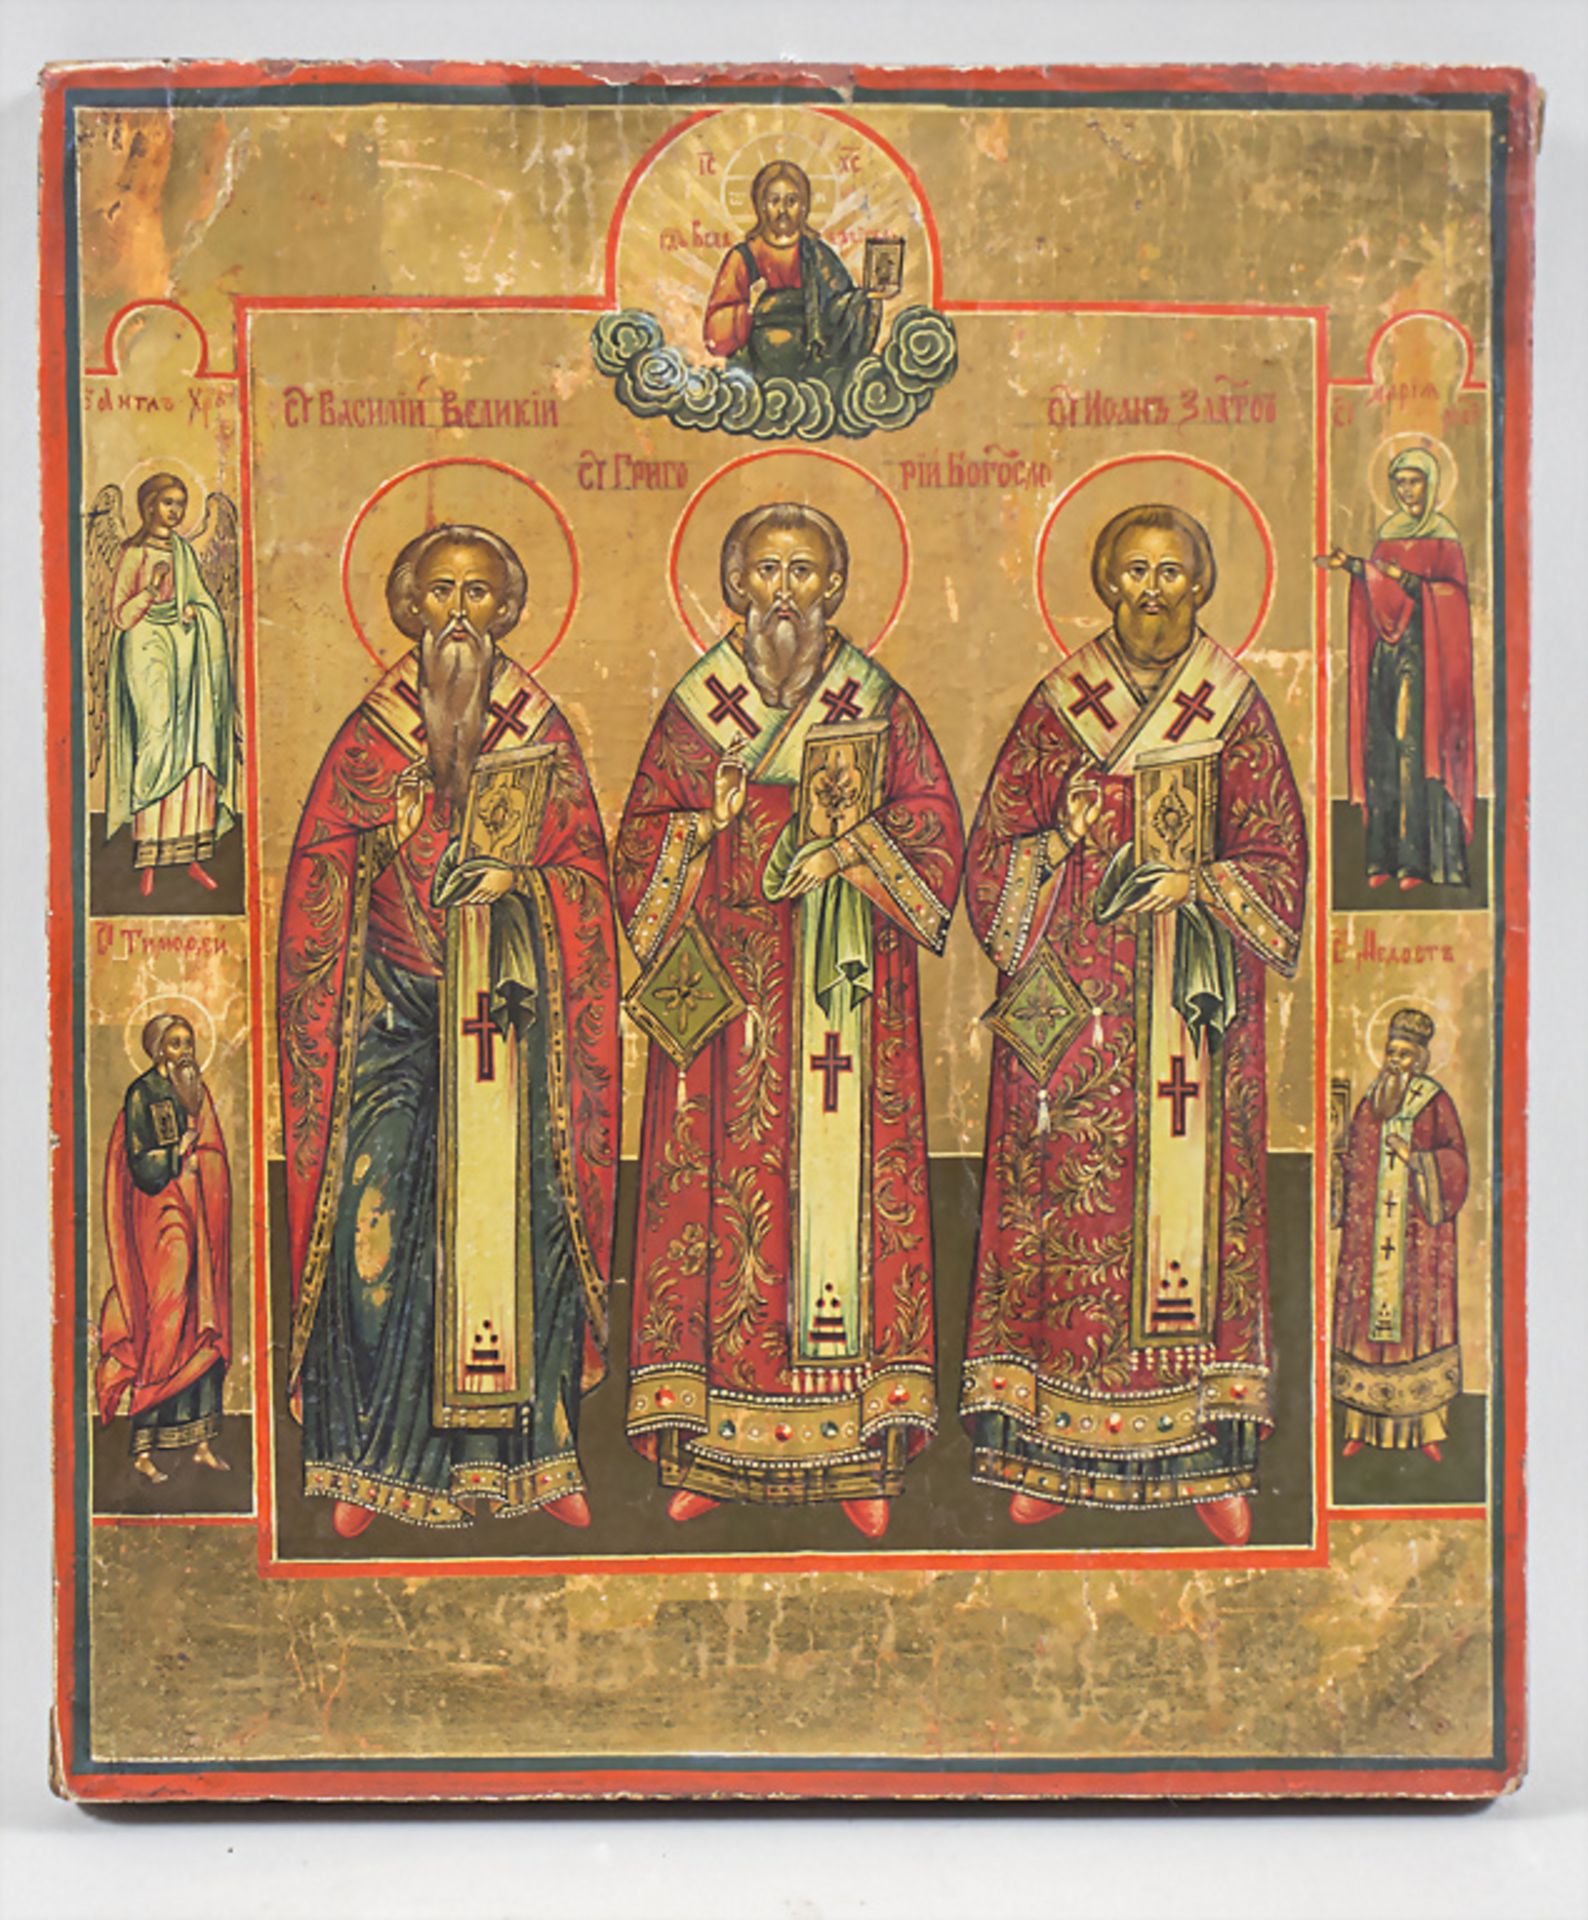 Ikone mit Gottvater und Heiligen / An icon with God Father and Saints, Russland, 19. Jh.